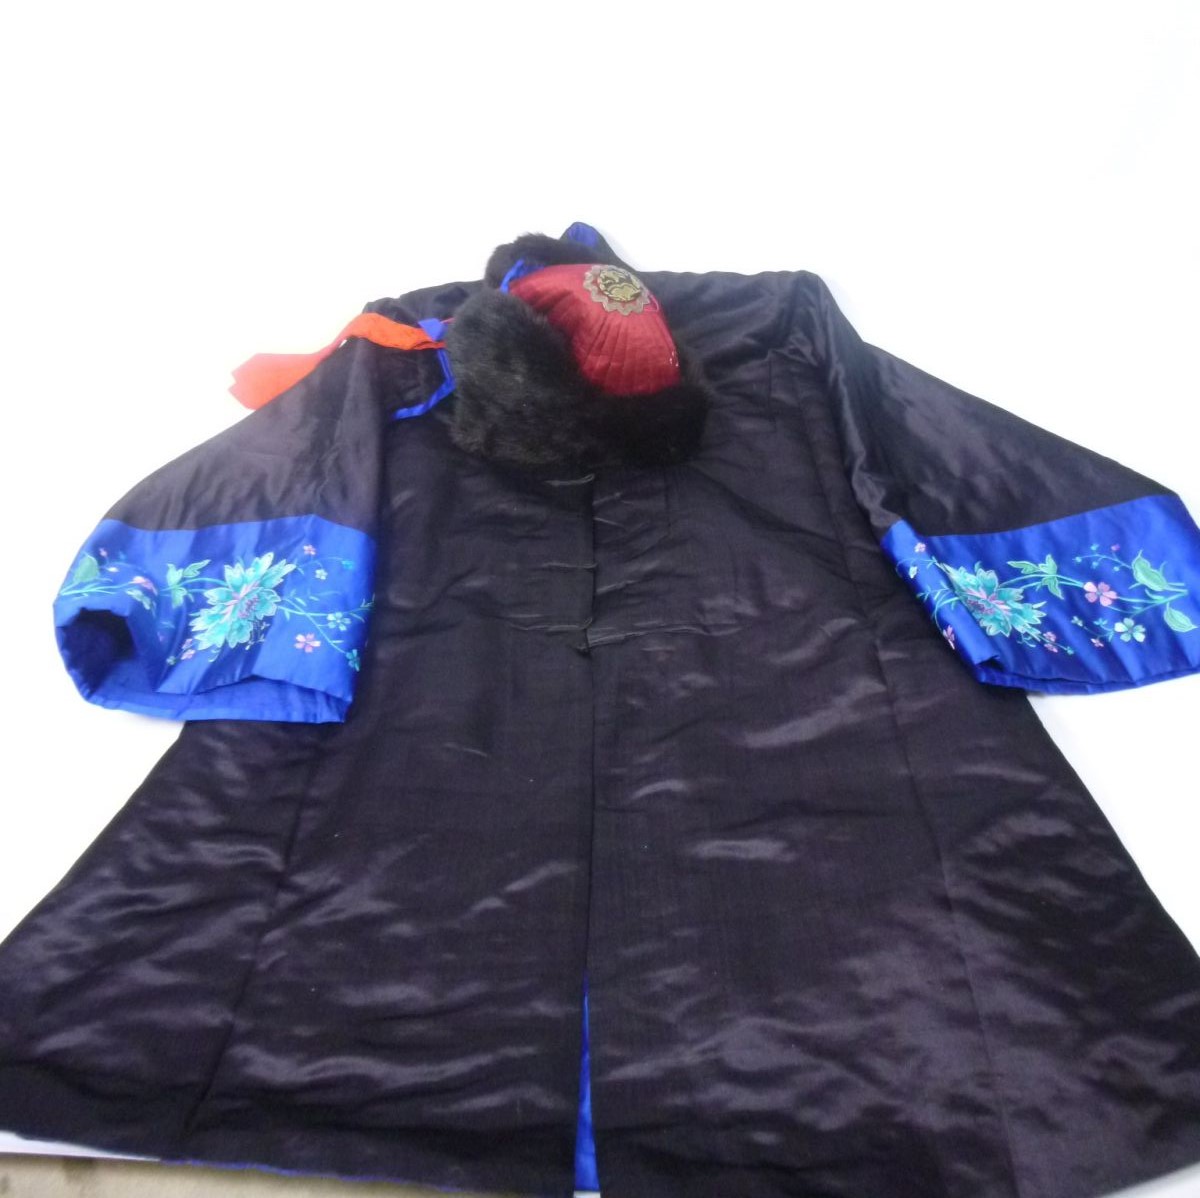 CHINESE SILK WINTER COATthe black silk trimmed with decorative foliate sleeve panels, with a label